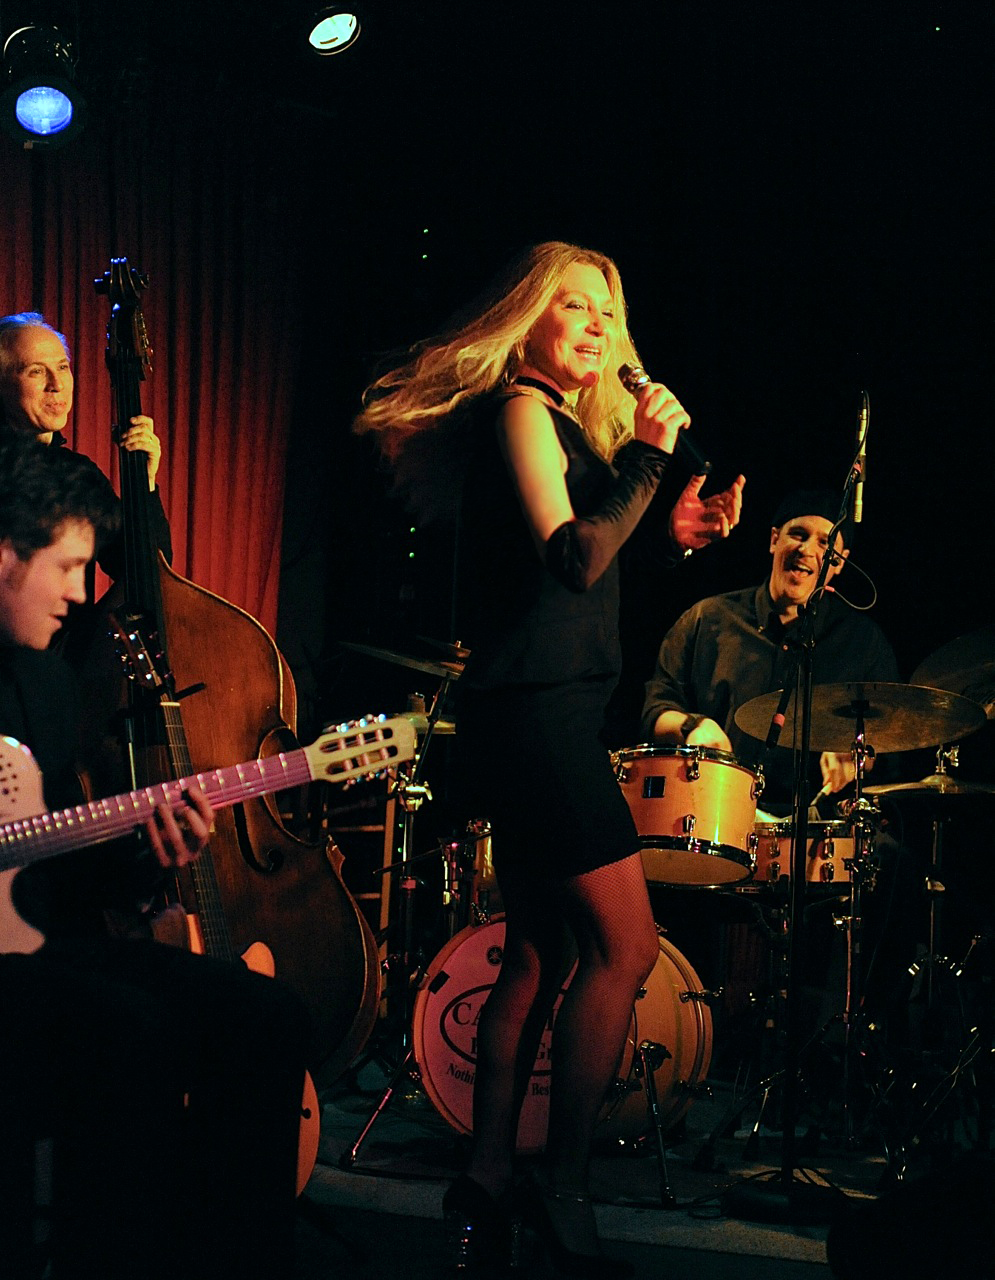 Live jazz eliane elias and her trio at catalina bar grill â the international review of music